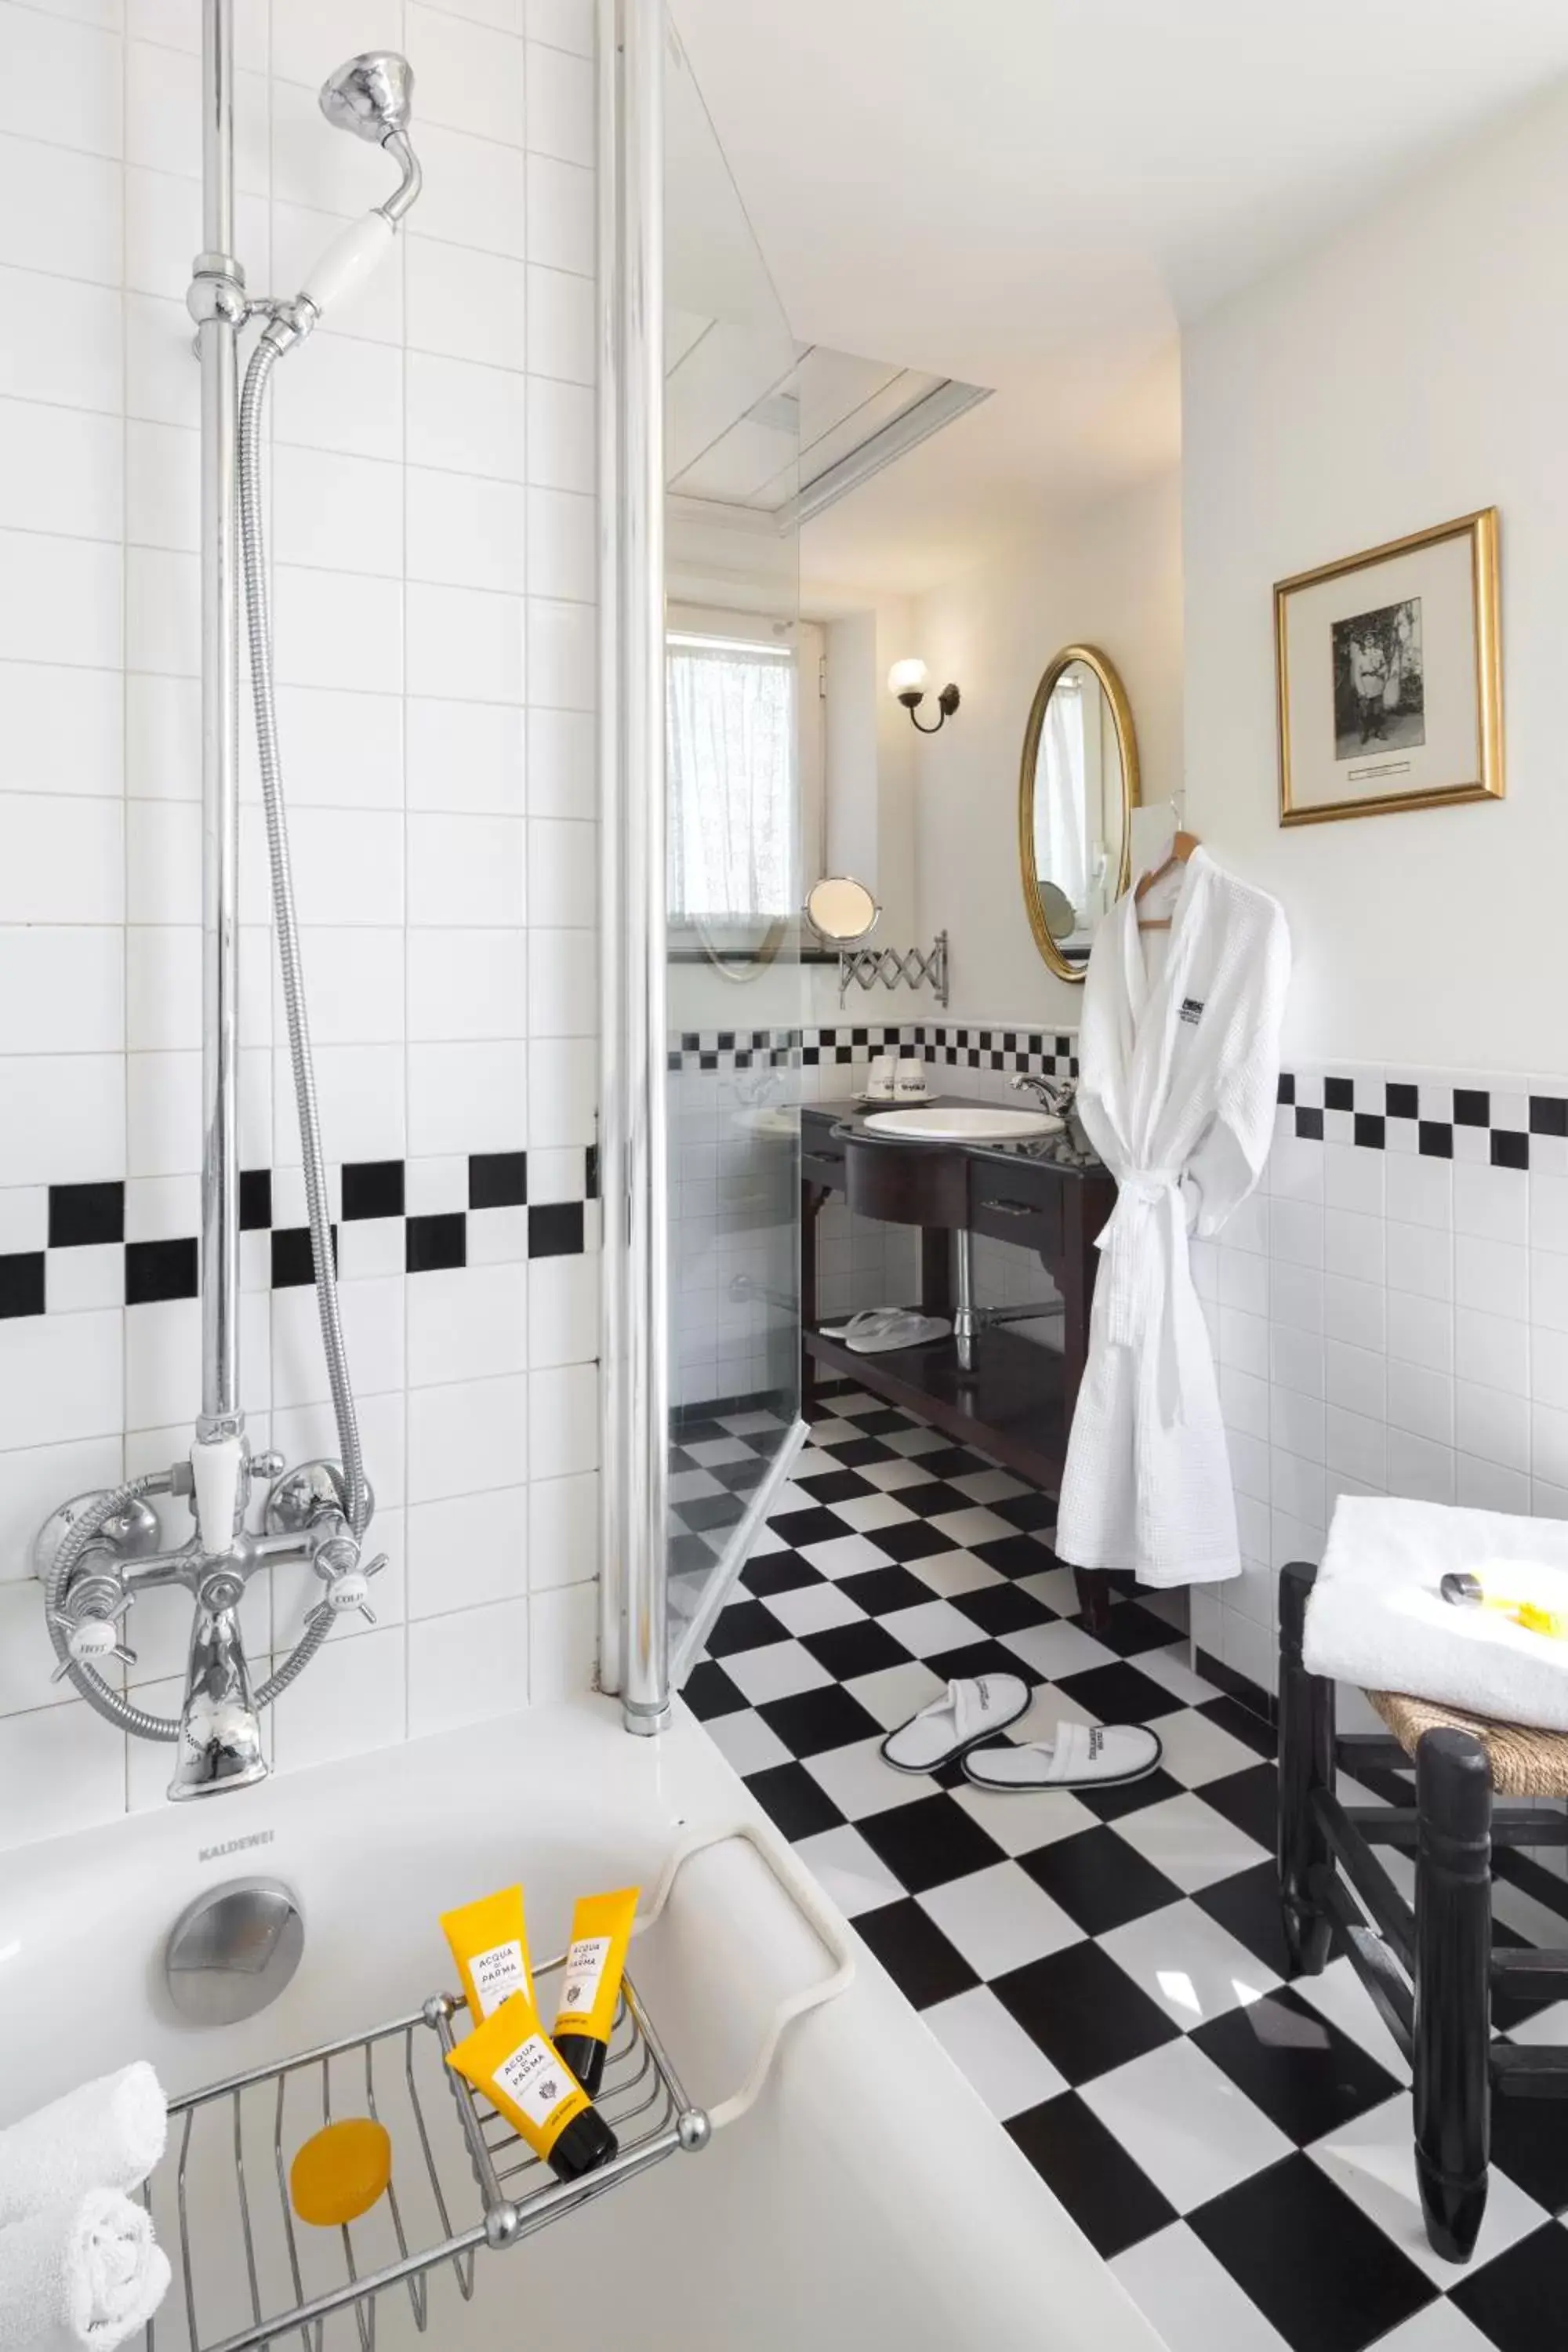 Bathroom in The American Colony Hotel - Small Luxury Hotels of the World